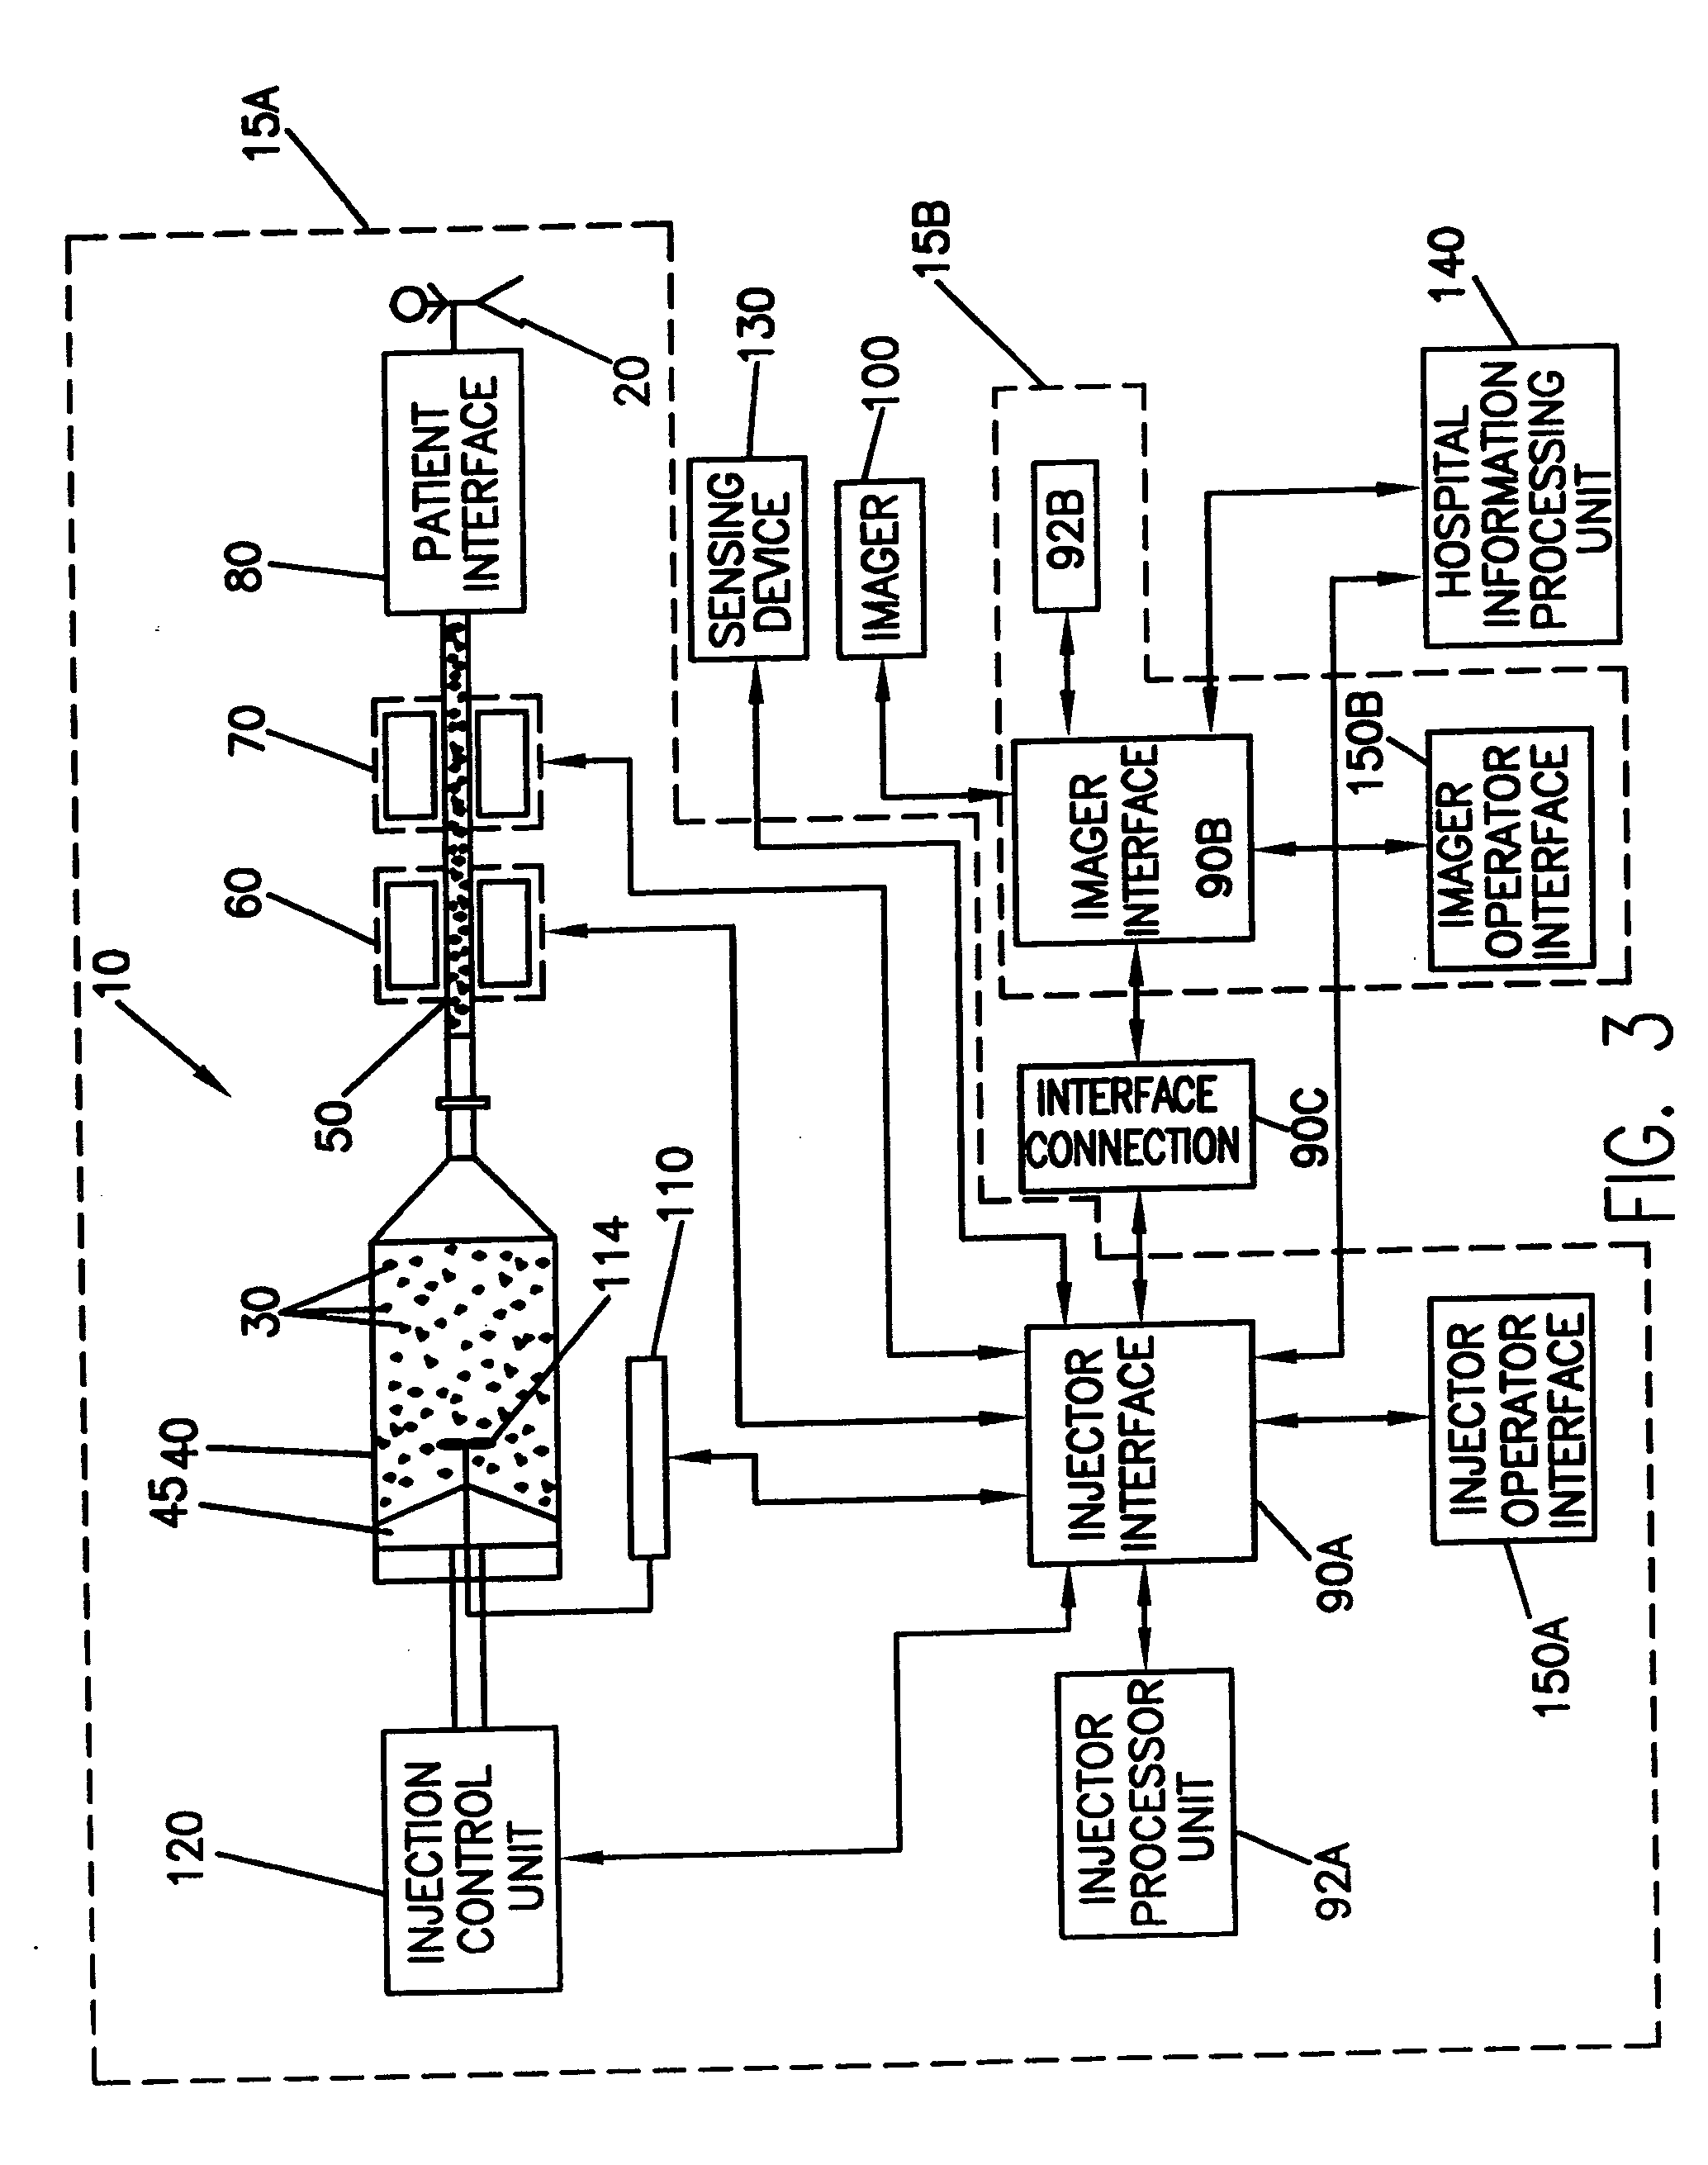 Data communication and control for medical imaging systems